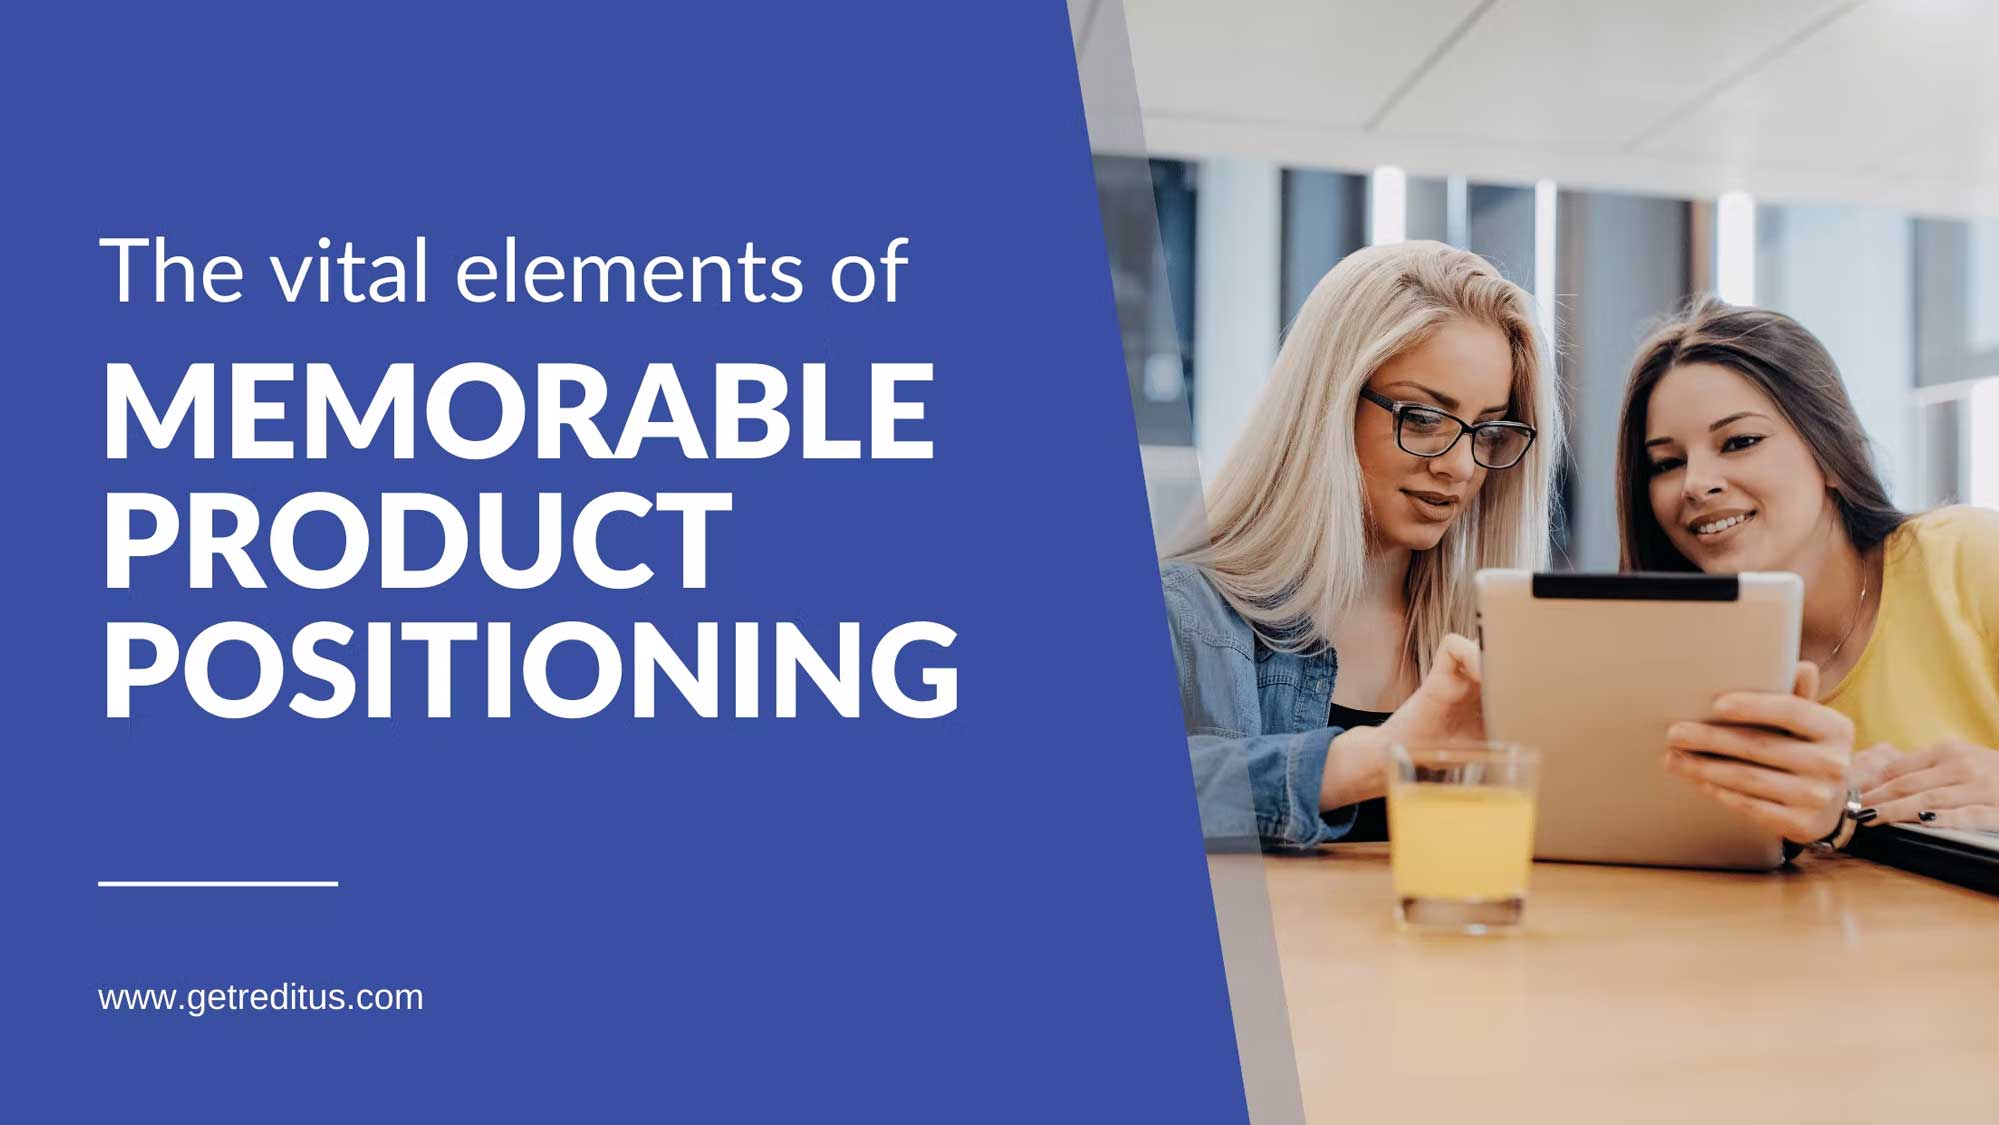 The 10 Vital Elements of Memorable Product Positioning